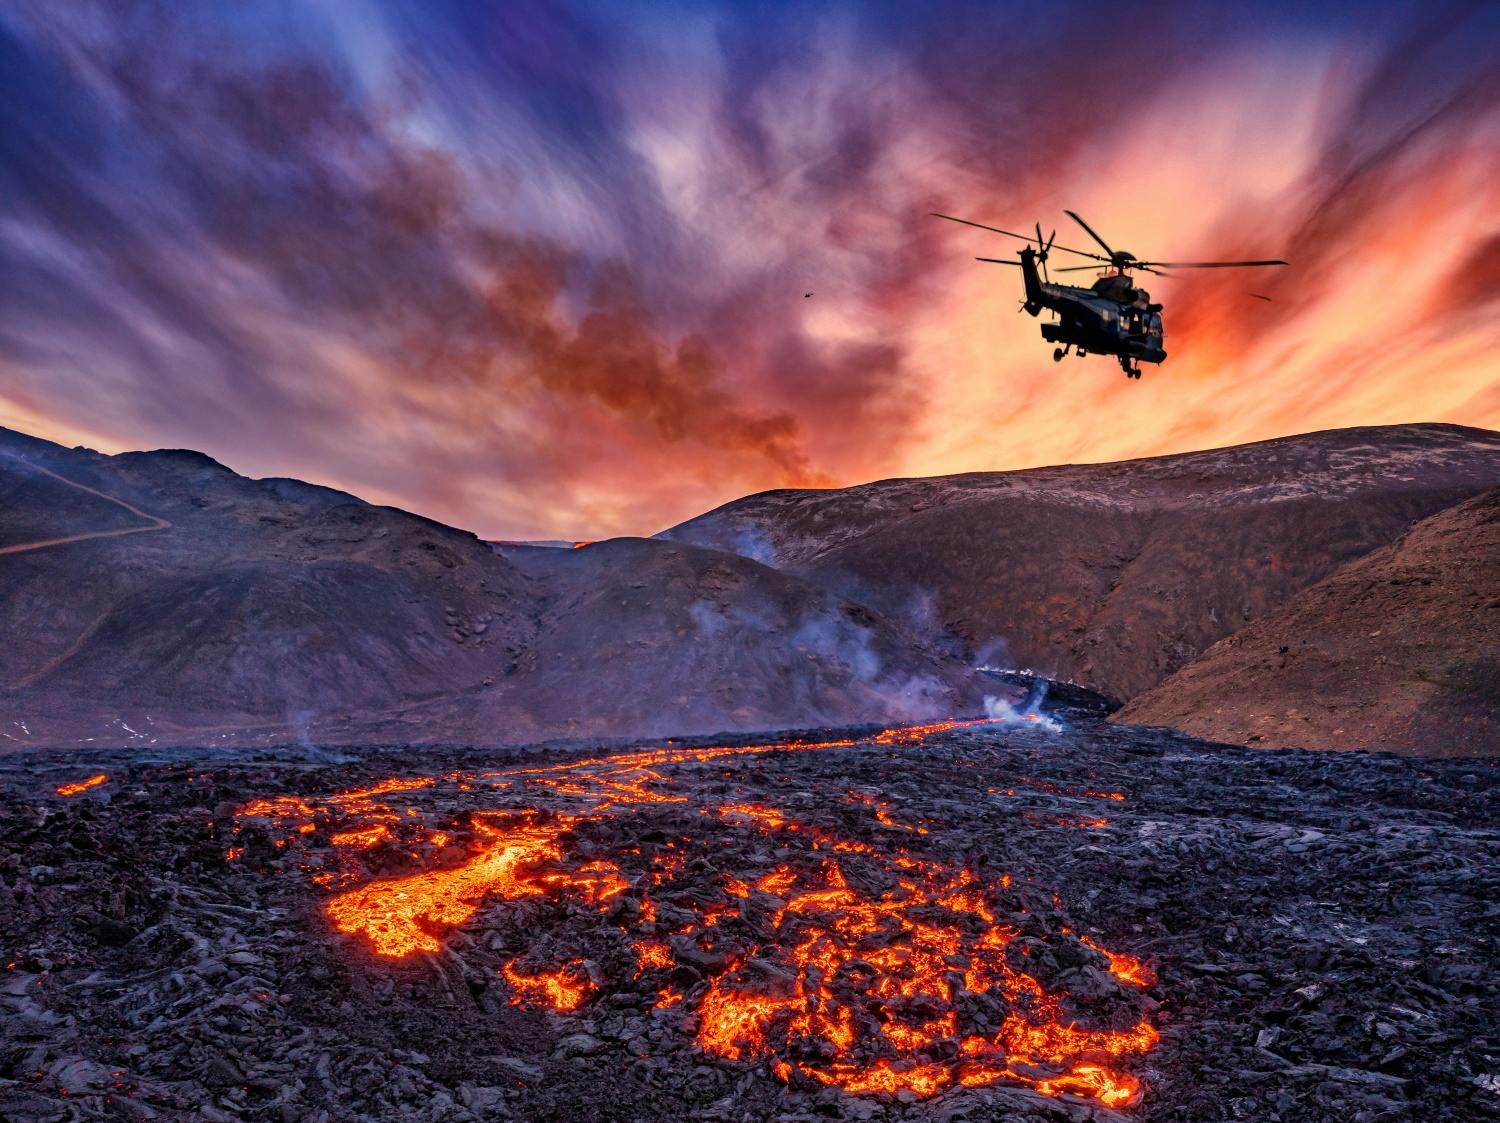 A helicopter flying over flowing lava in Iceland